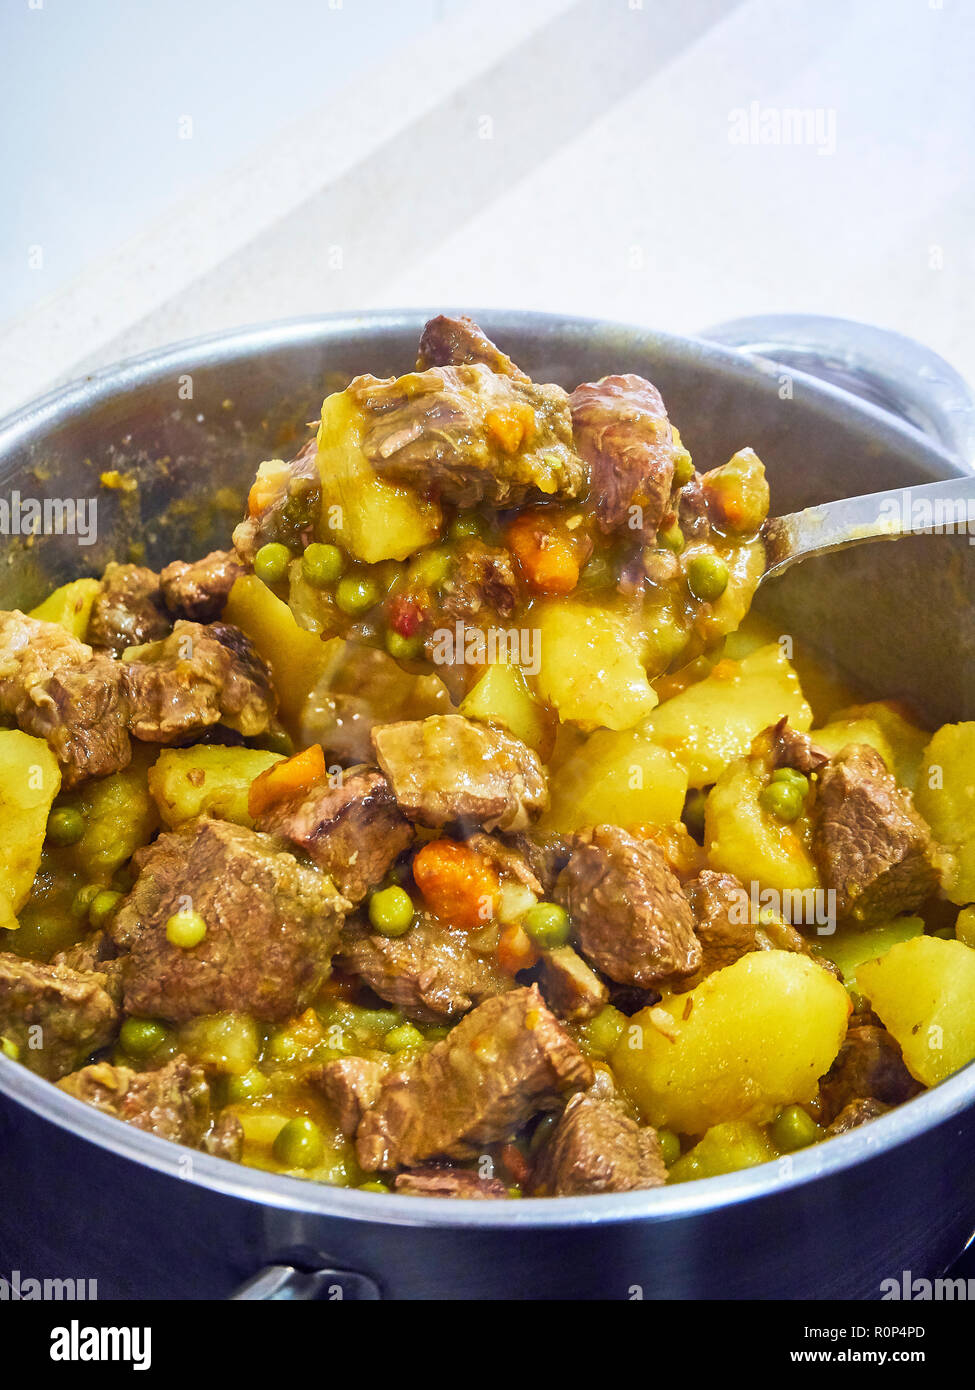 A pot of Sukalki, a traditional a stew of meat of the typical Basque cuisine. Stock Photo